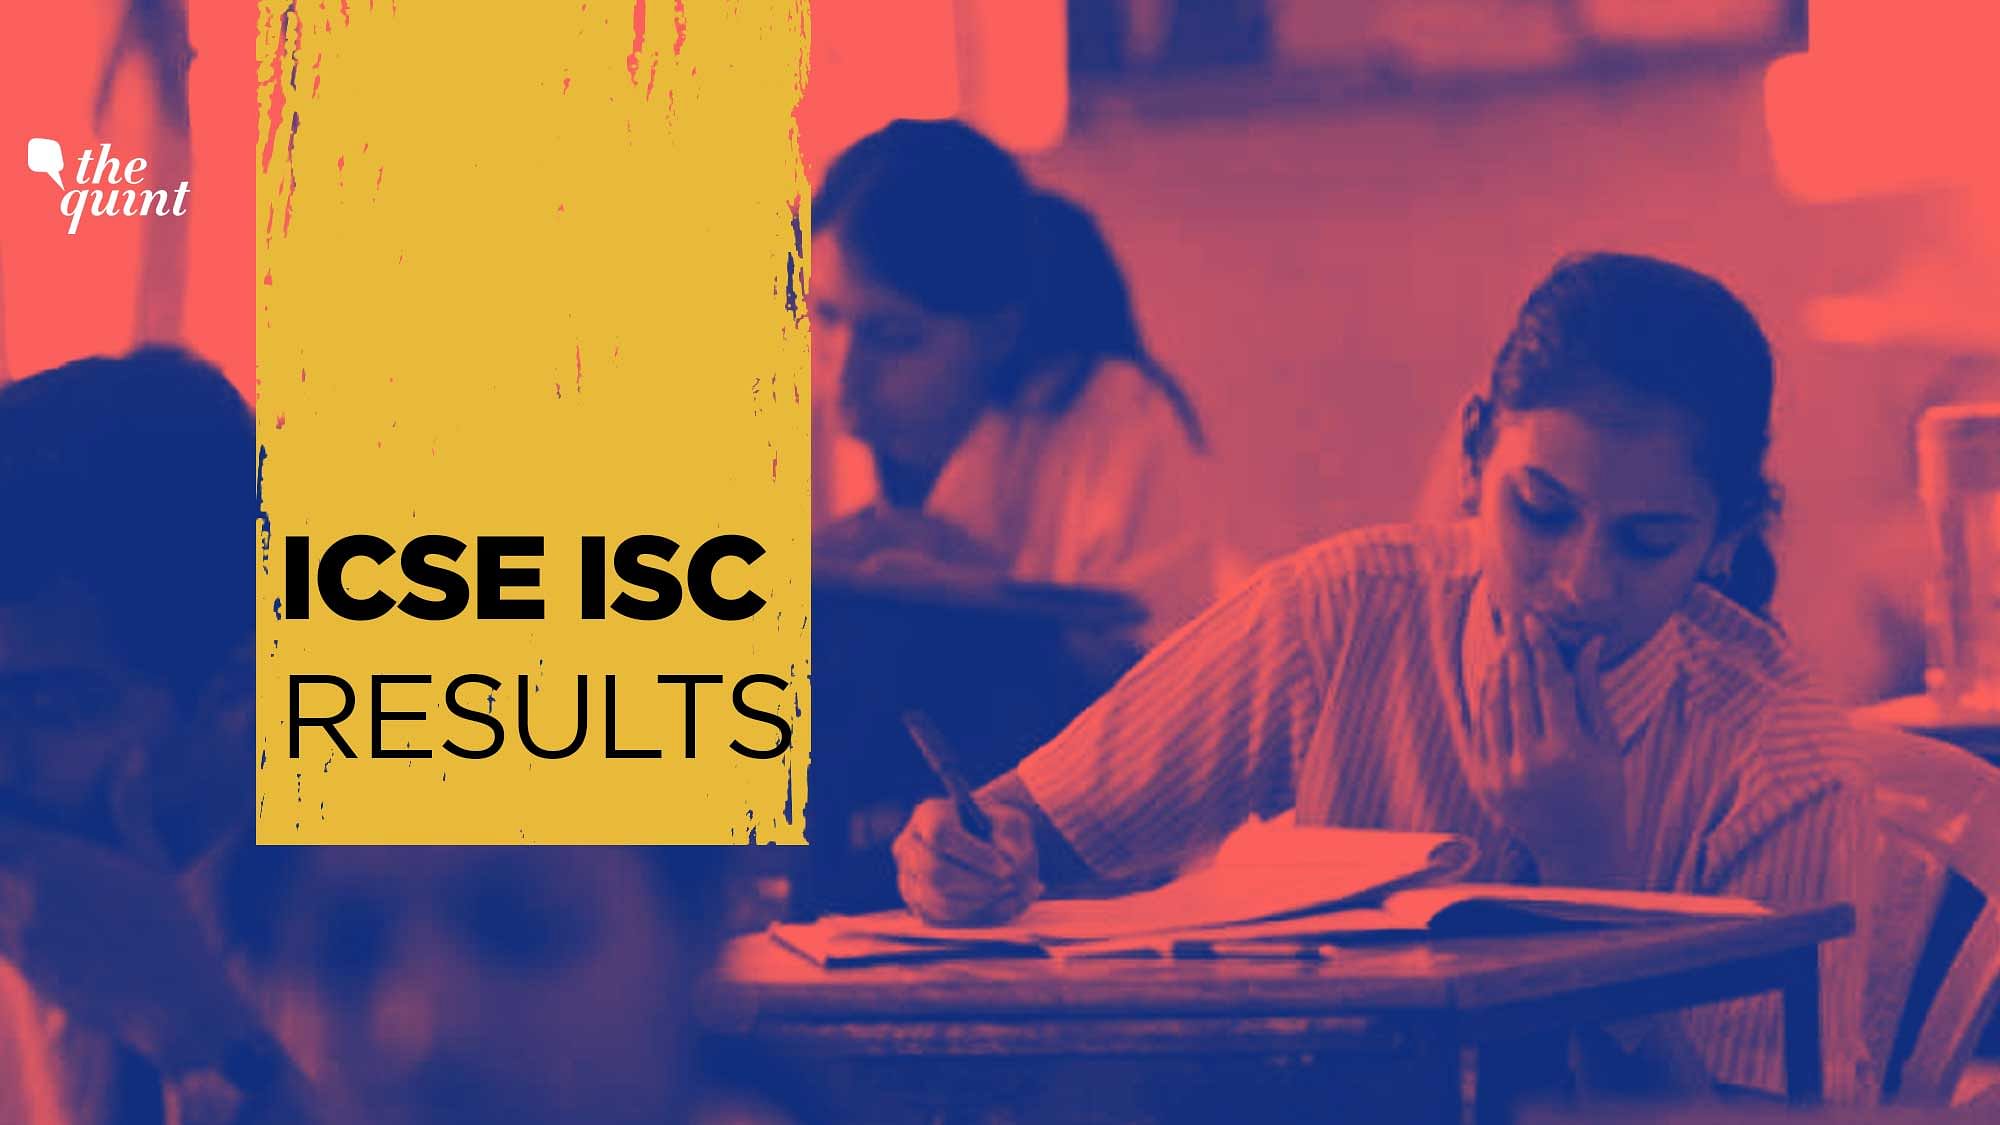 Students can check ICSE &amp; ISC results on www.cisce.org or www.results.cisce.org.